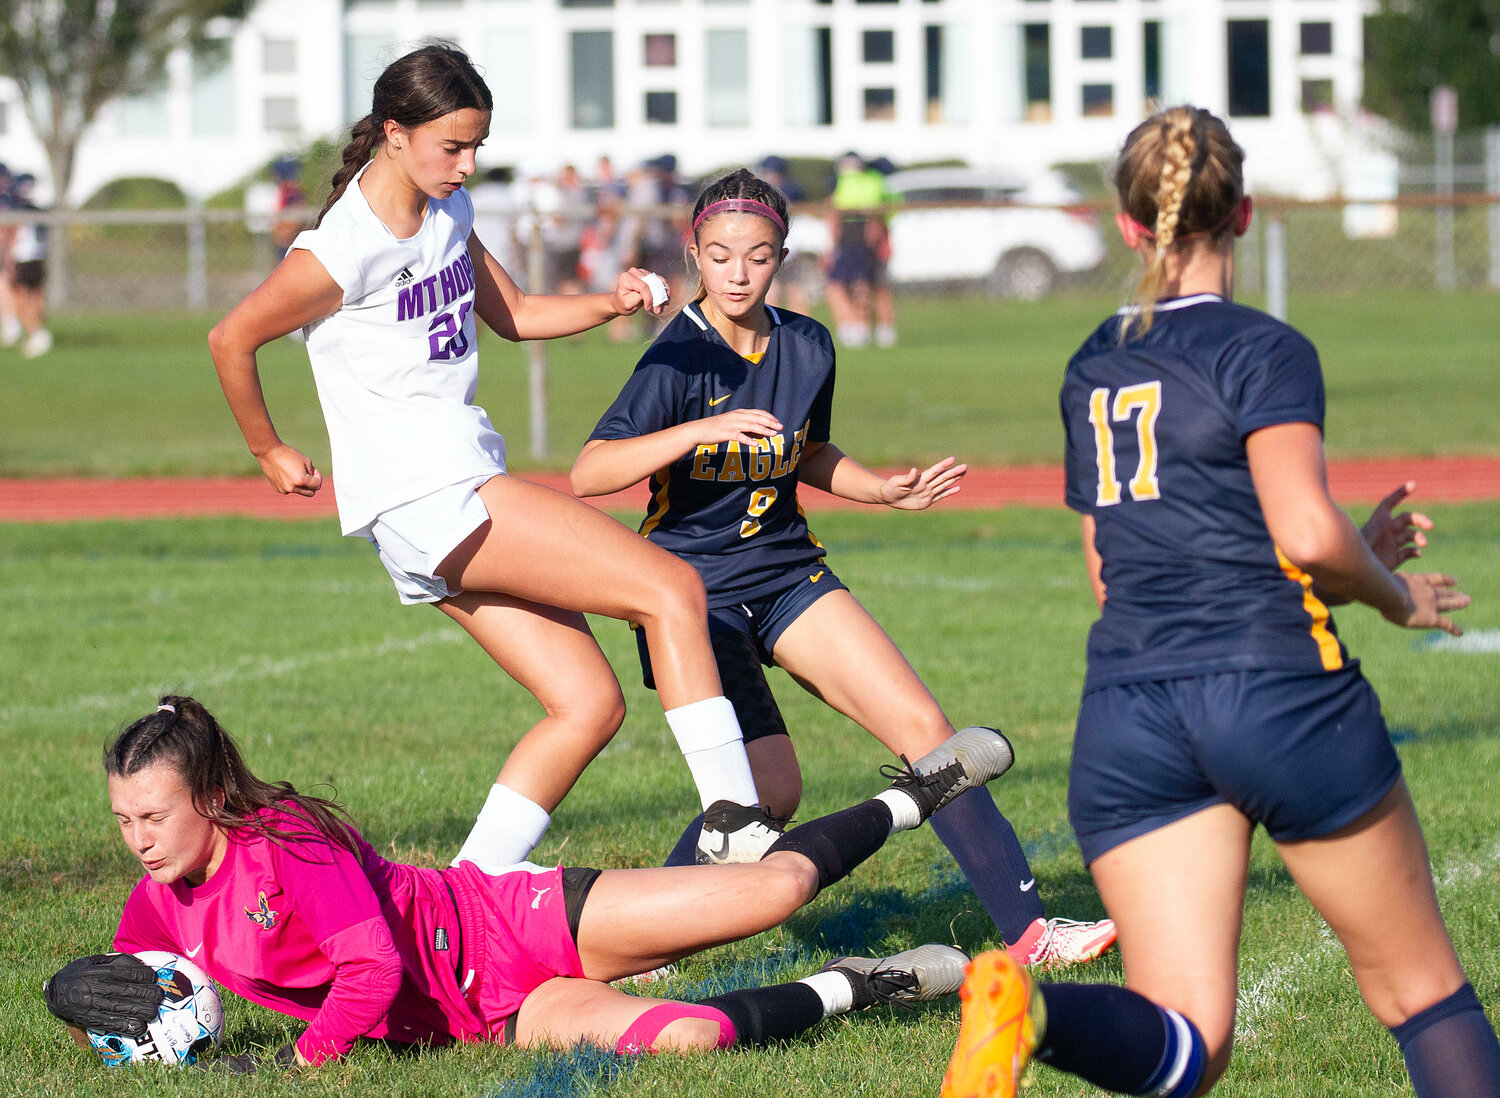 Barrington goalkeeper Maddie Gill dives to make a save on a through ball, before Huskies' striker Thea Jackson can get a foot on the ball. Barrington’s Makenzie Lema (left) and Lilly Swintak (right) look to help Gill.